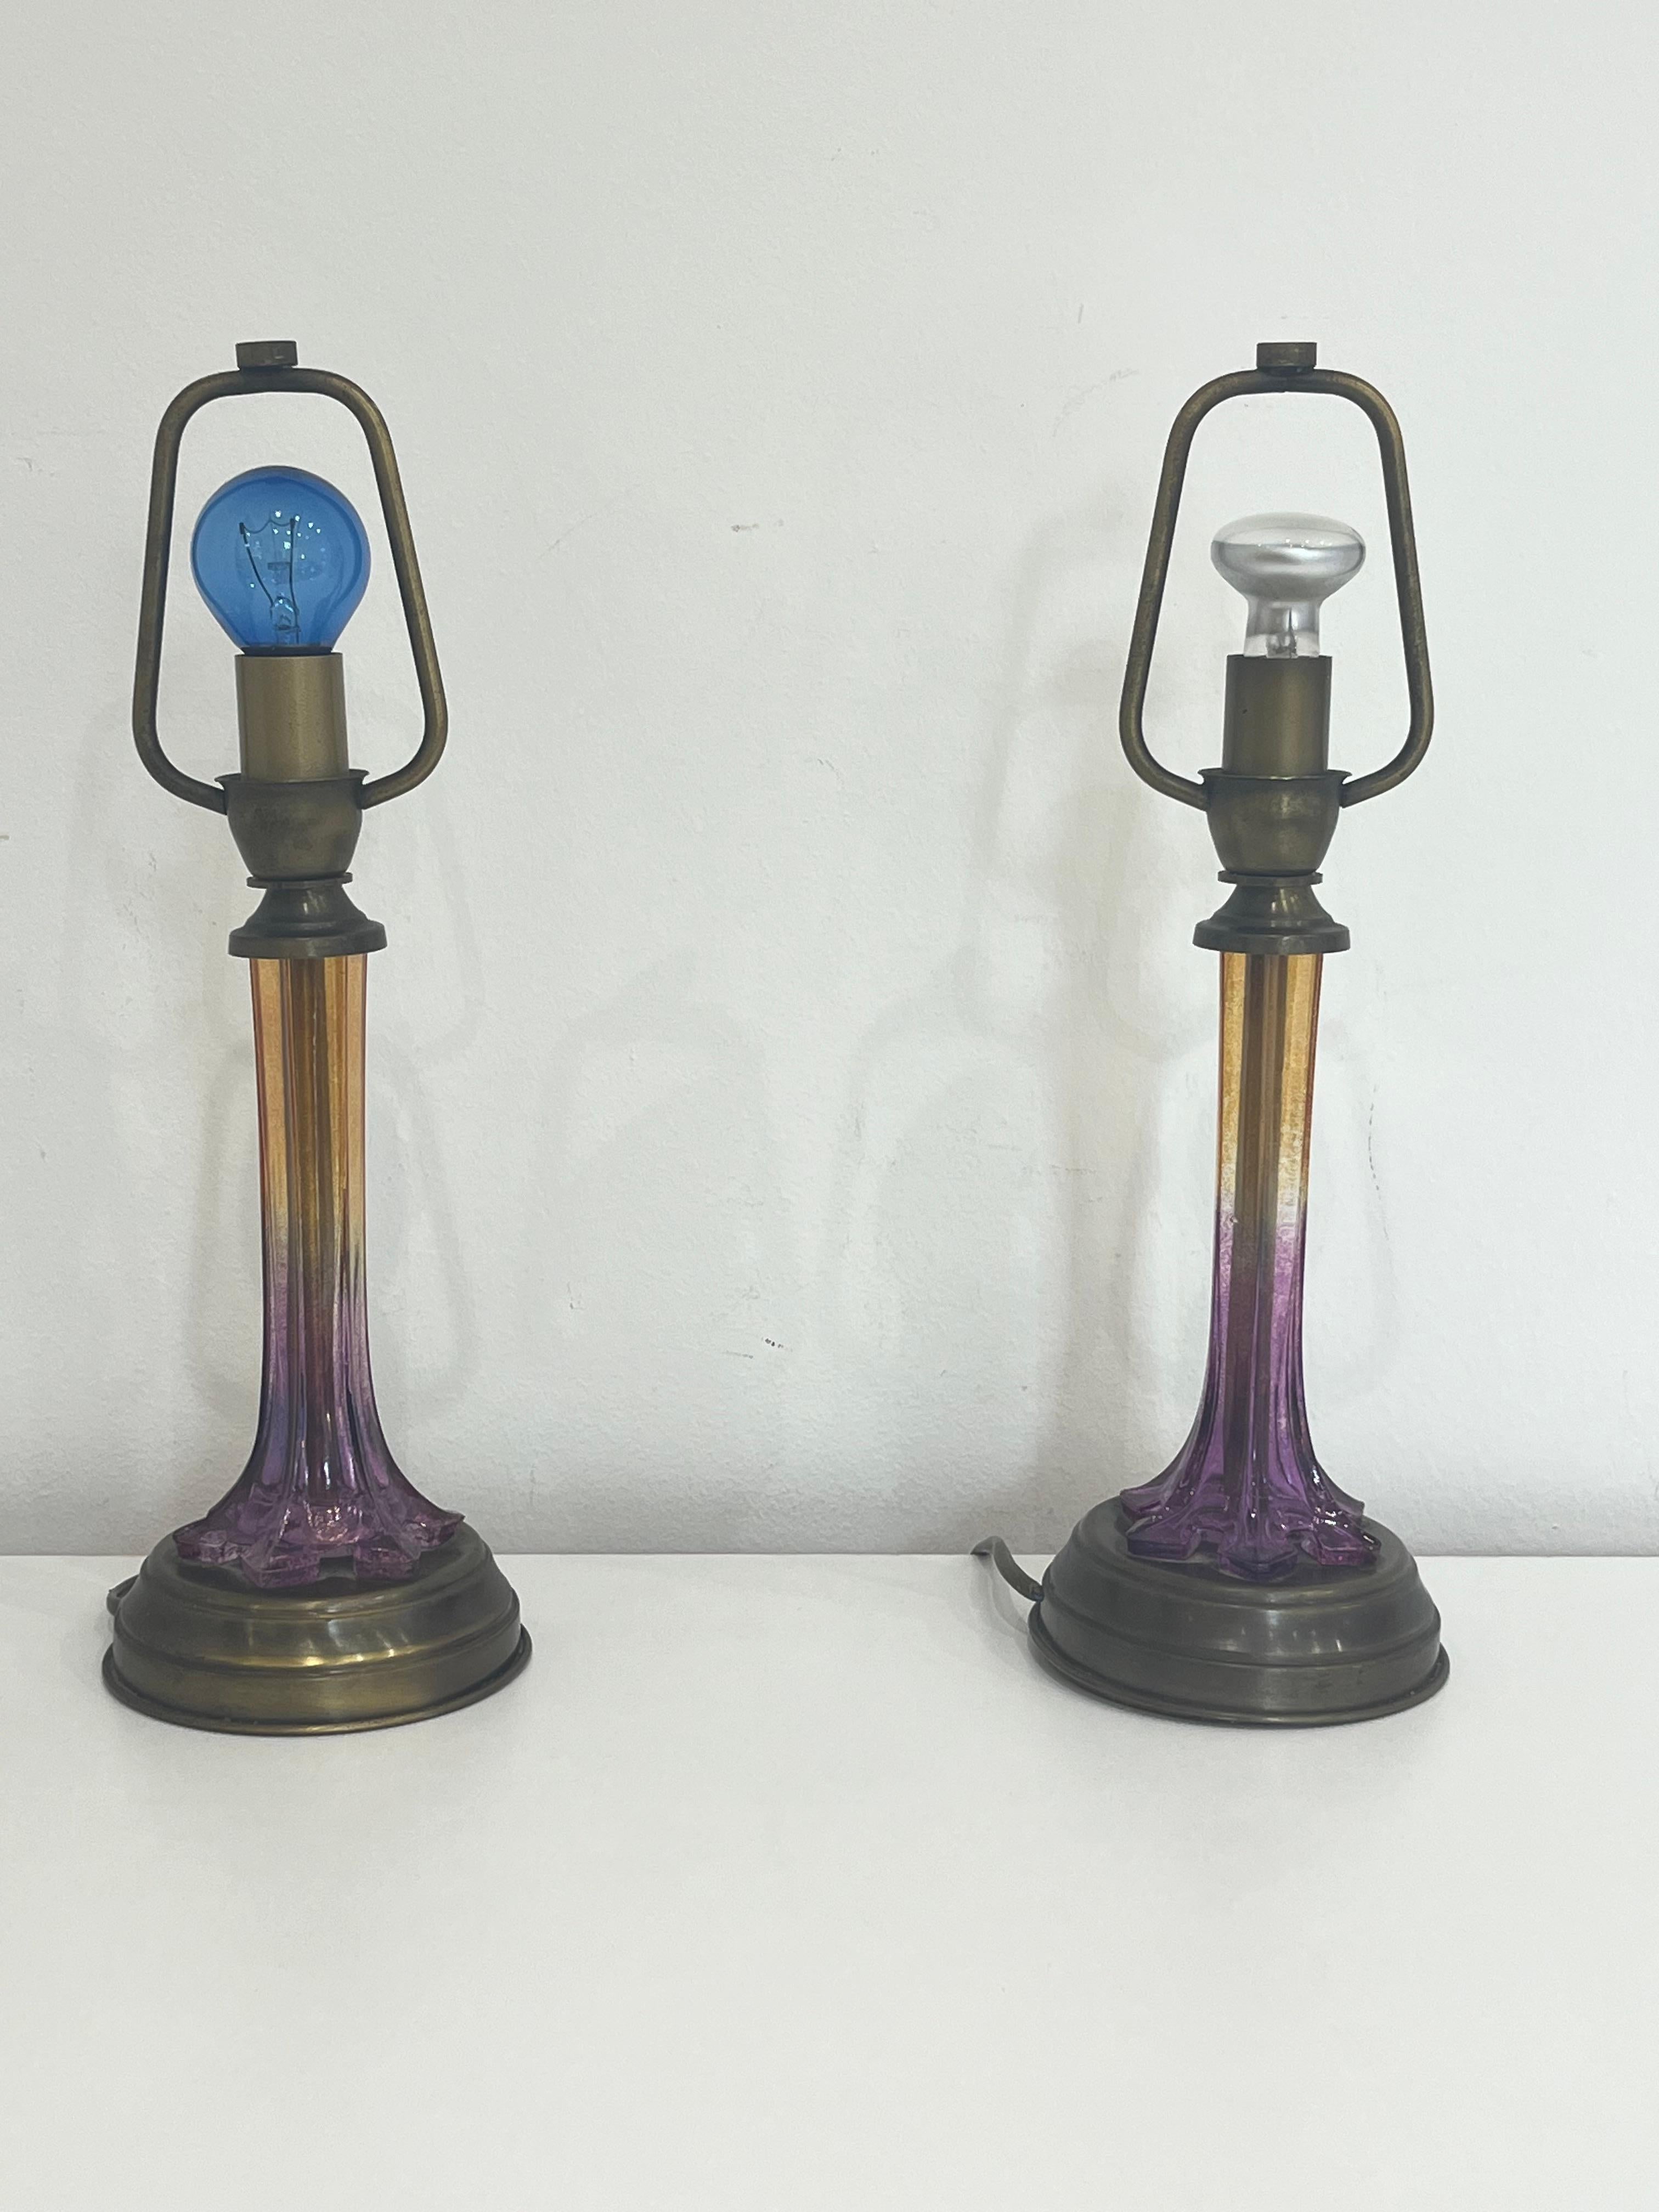 Pair of Murano glass and bronze table lamps, Italy, 1970s
They belonged to my maternal grandparents, they are intact and in good condition. Lamps e14.